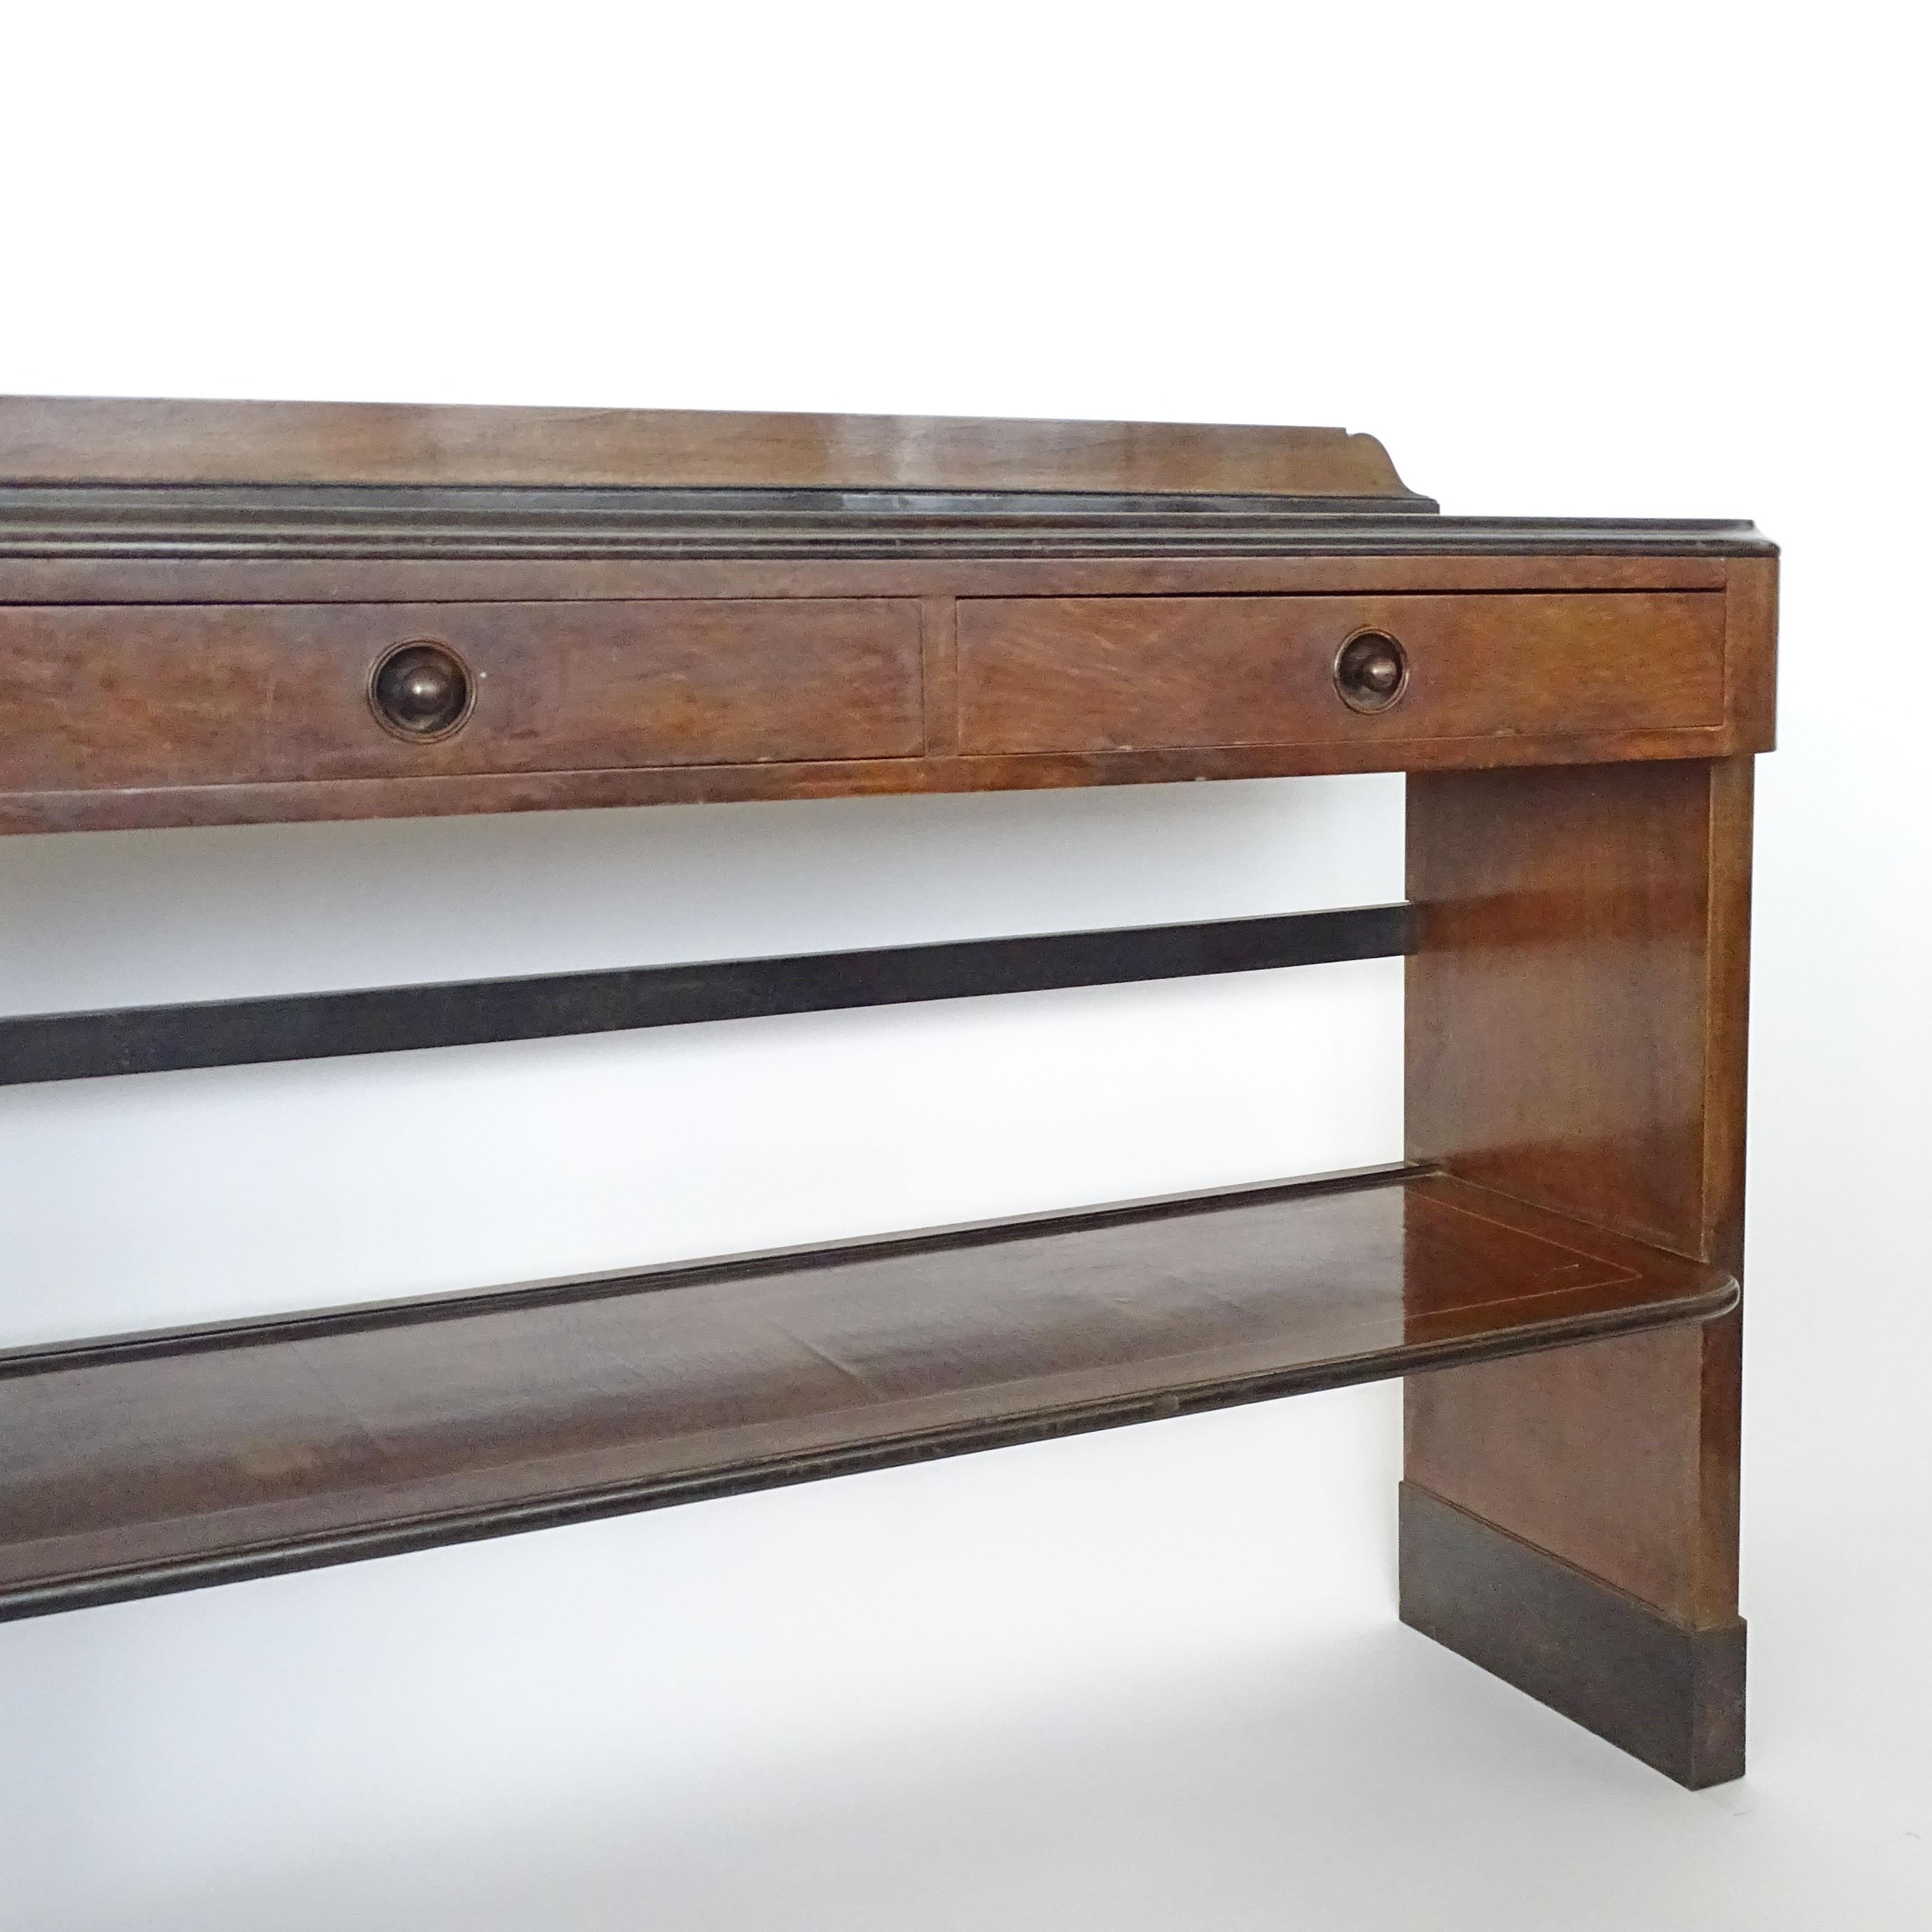 Mid-20th Century Italian Art Deco freestanding console with two drawers and lower shelf. For Sale